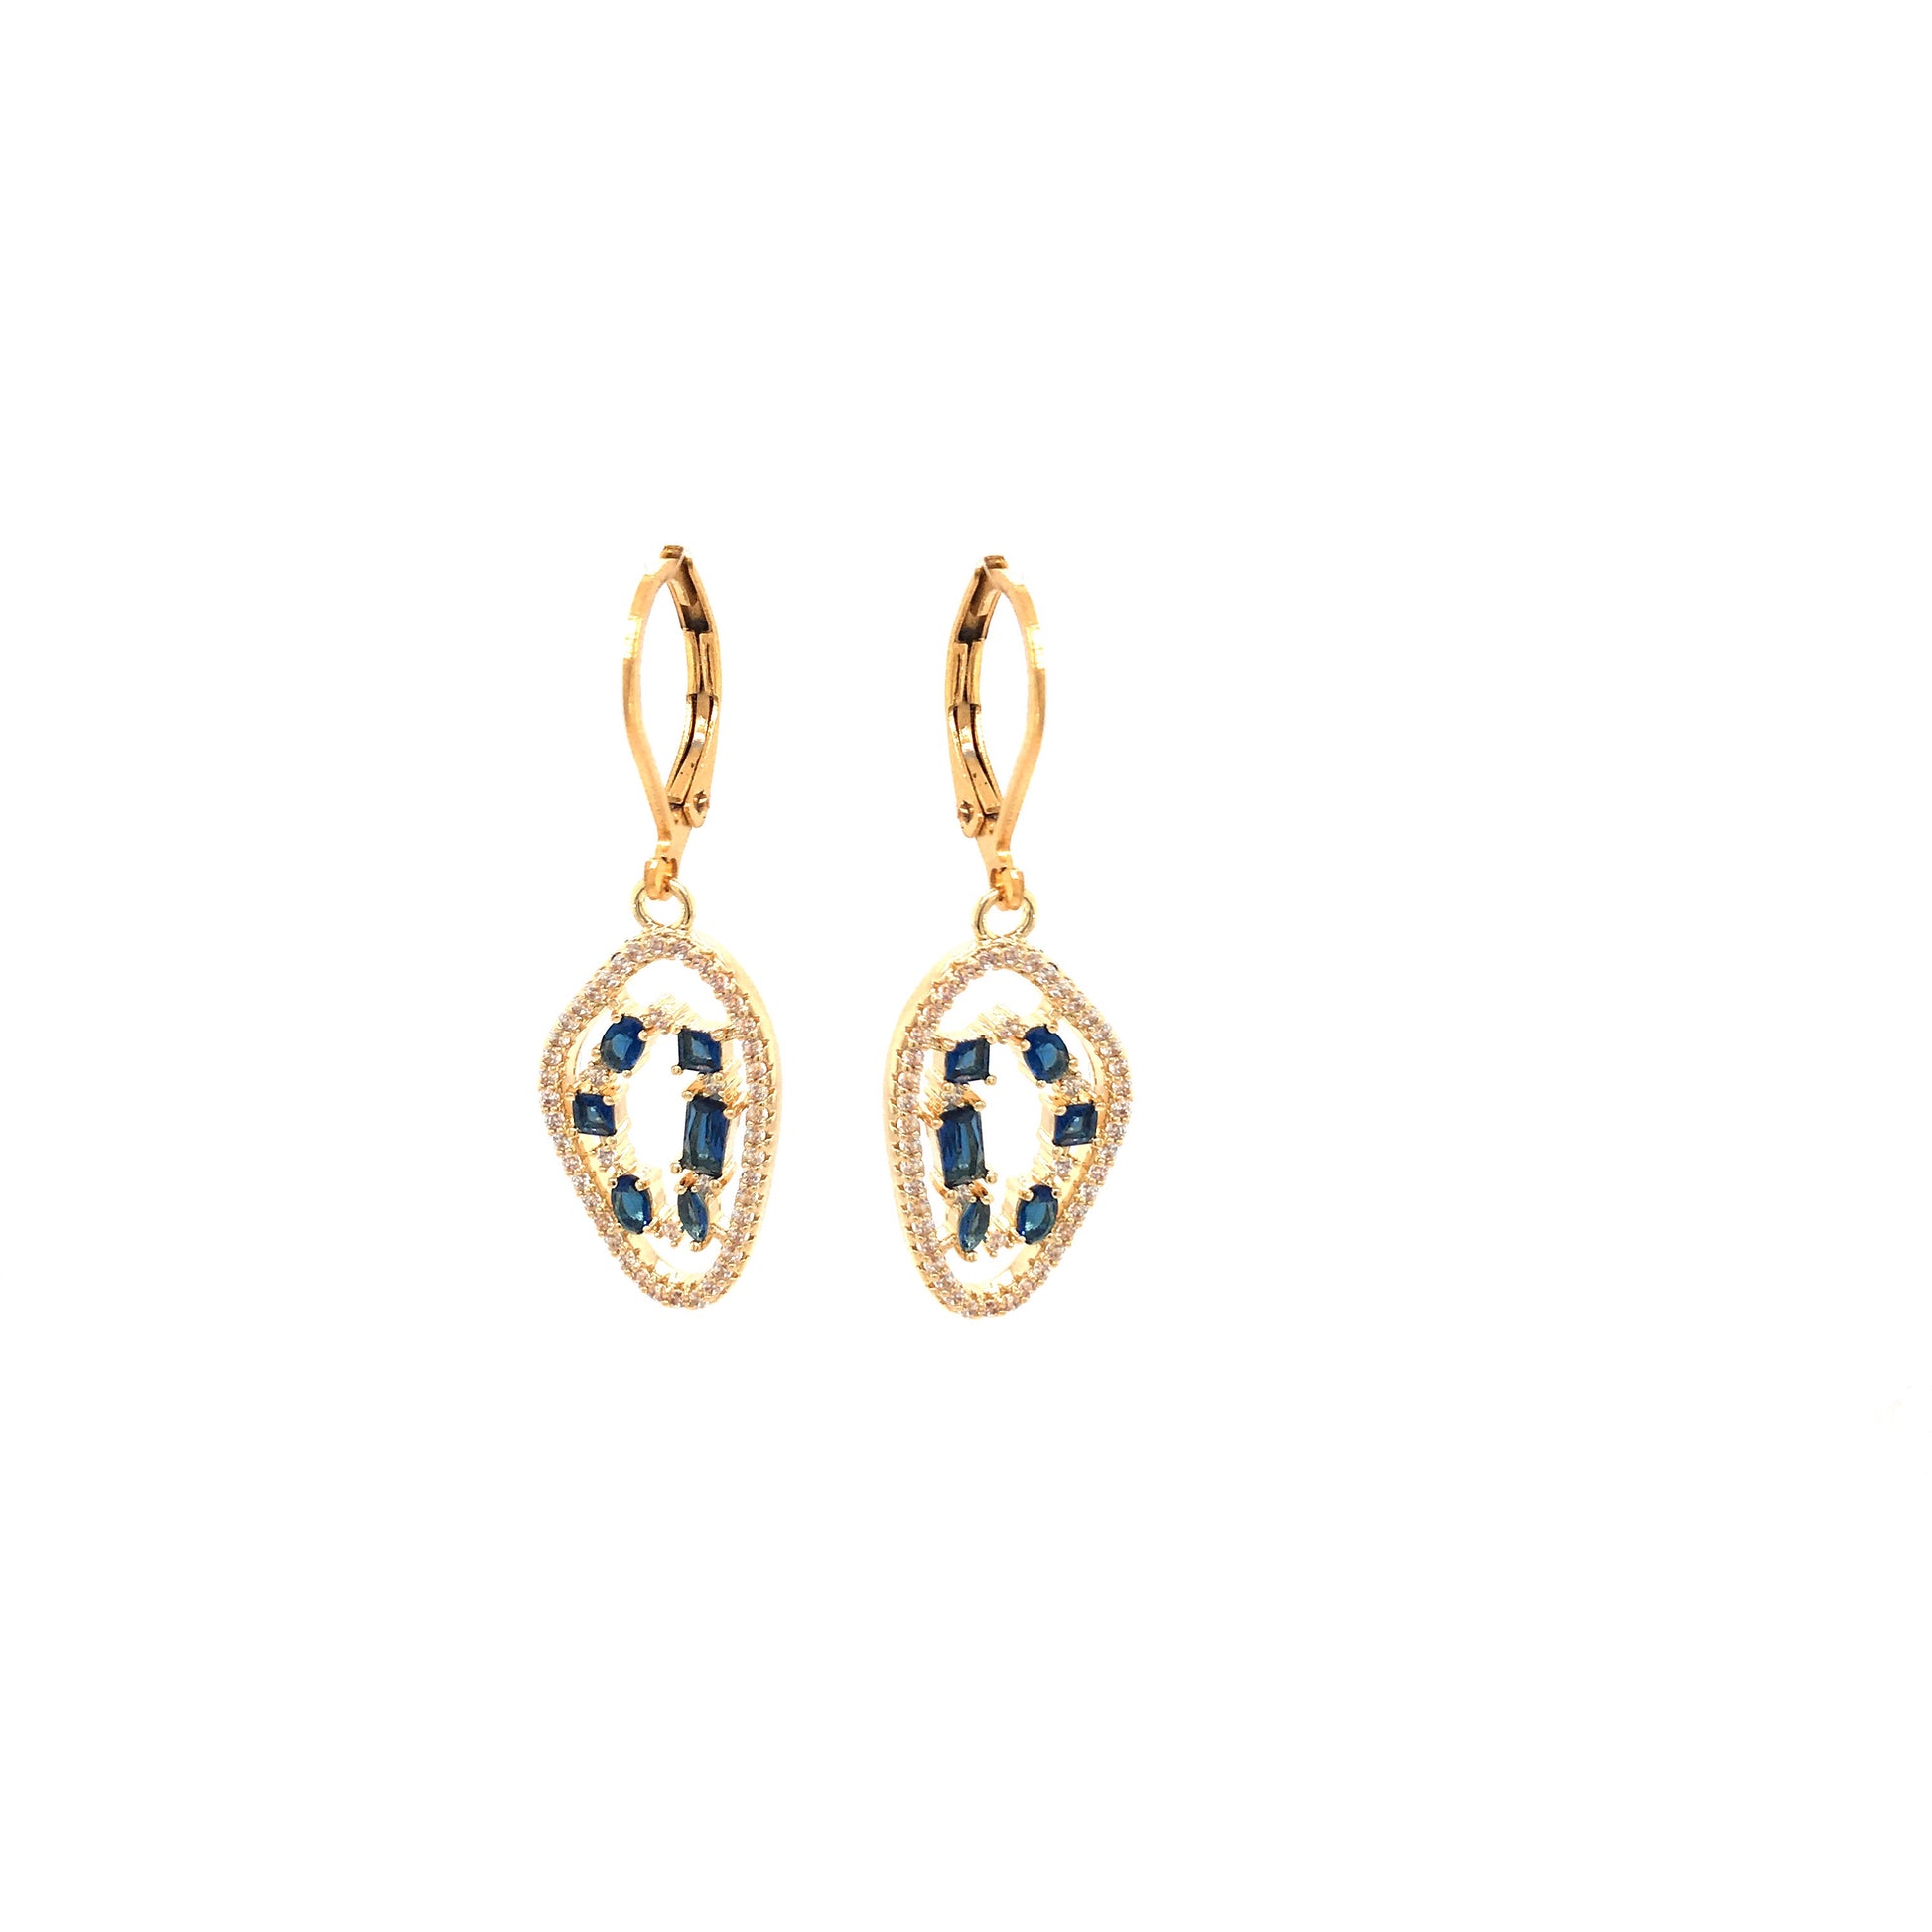 Gold Plated Earring In Natural Stone Shape With Micropave Stones - HK Jewels